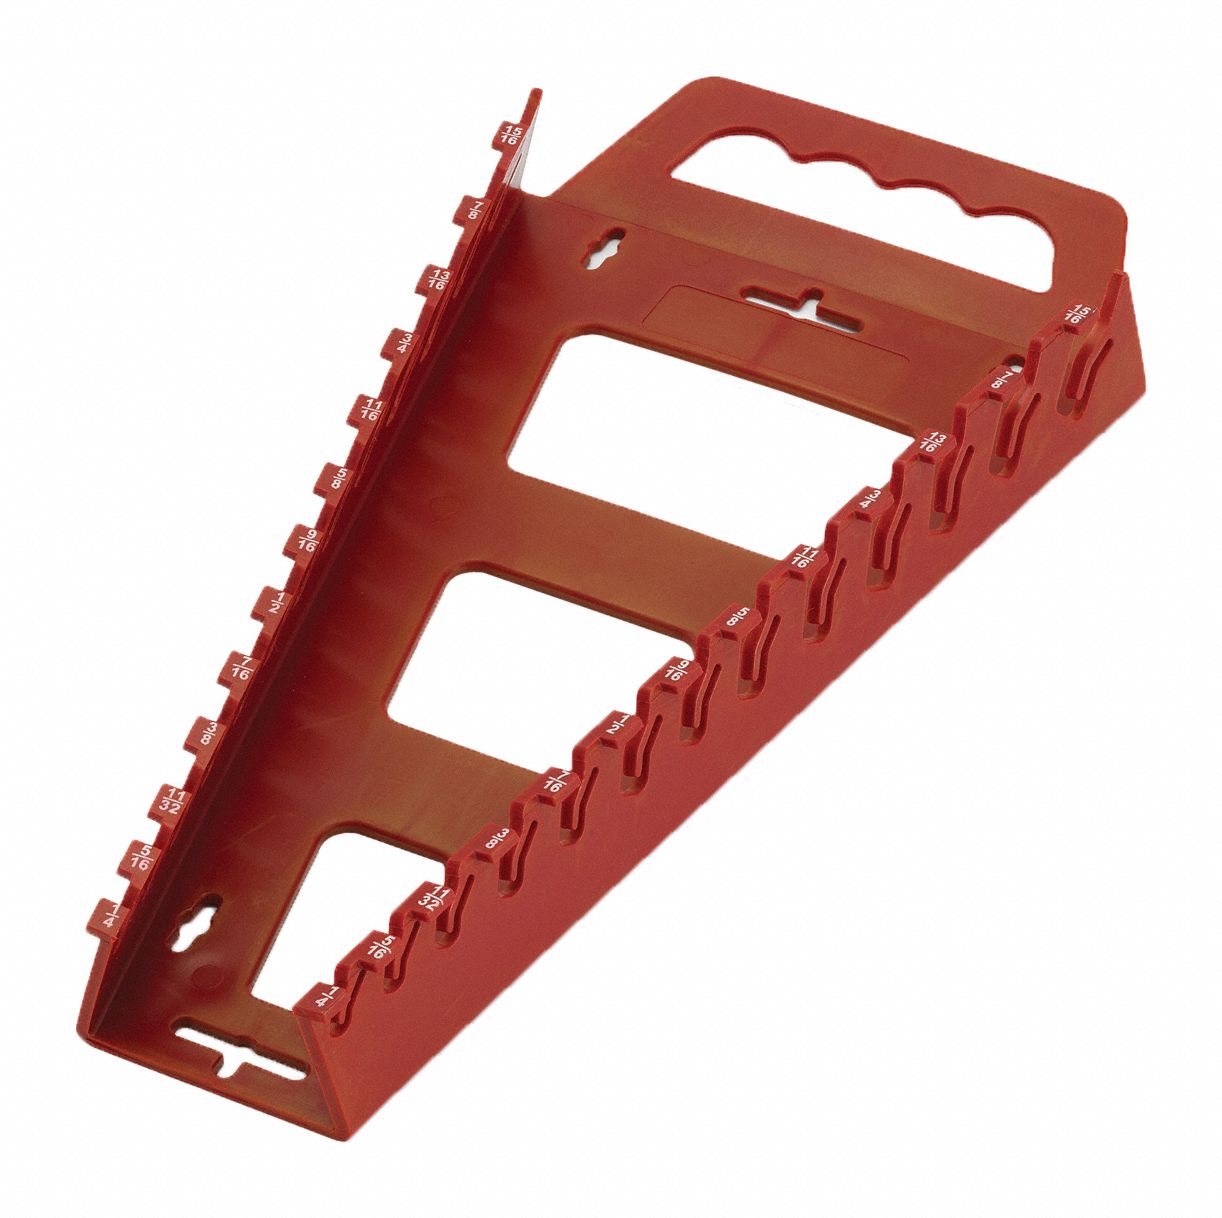 Wrench Rack: Red, 6 1/2 in Overall Wd, 1 1/2 in Overall Ht, 12 1/4 in Overall Lg, Plastic